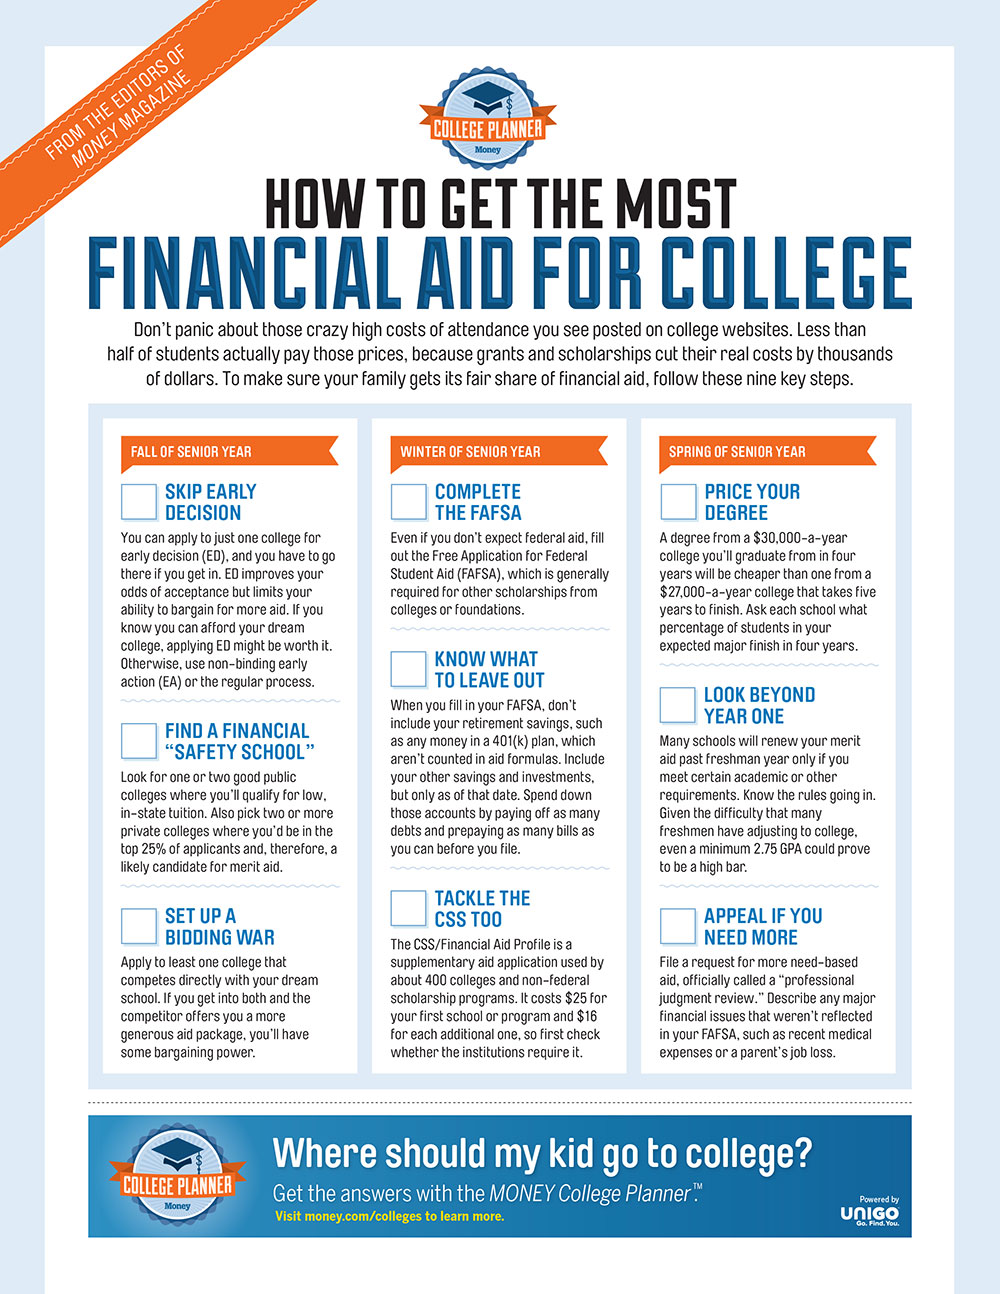 How to Get the Most Financial Aid for College